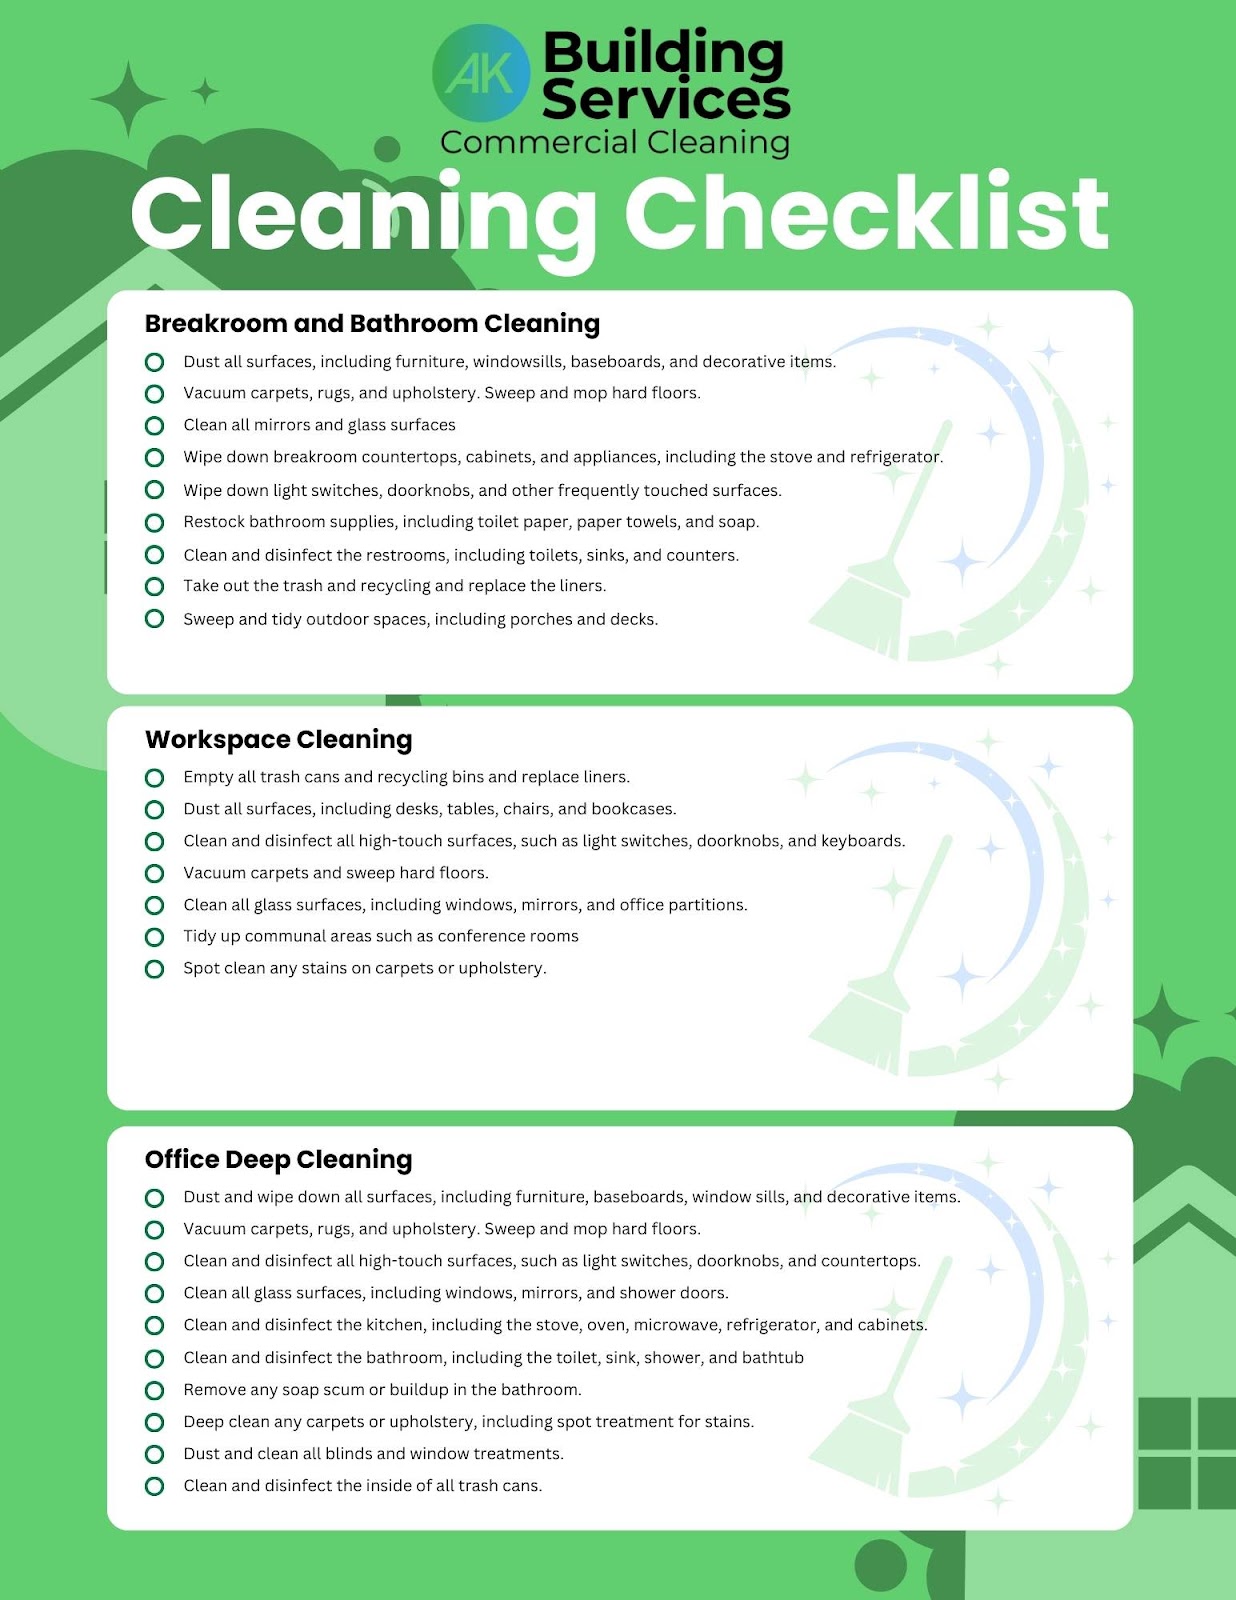 An office cleaning checklist everyone can use.